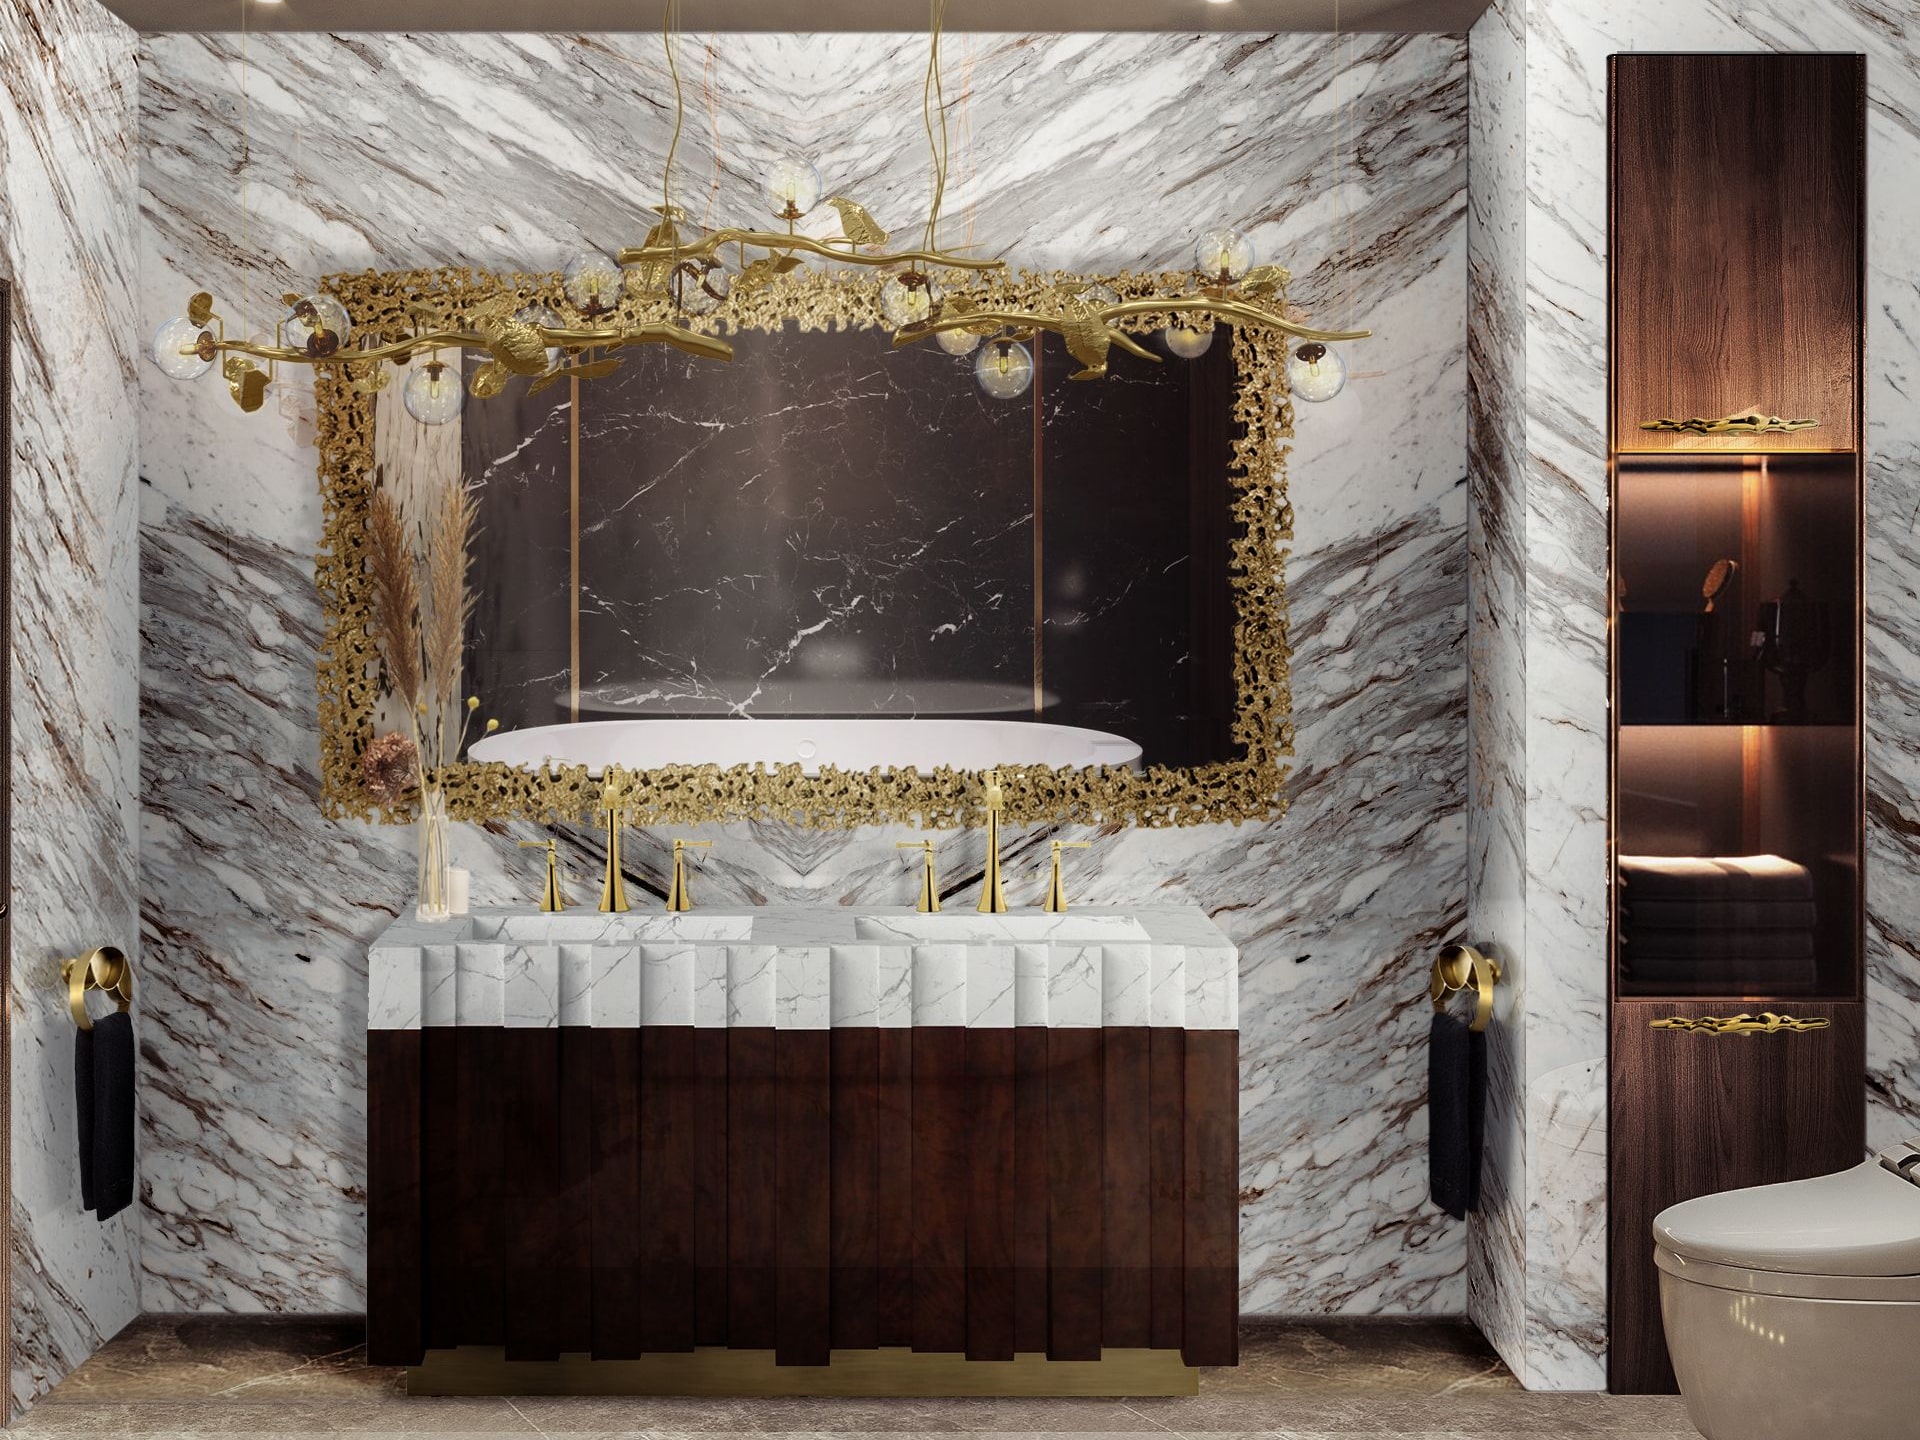 Luxury Bathroom Design With A Marble Sink - Home'Society